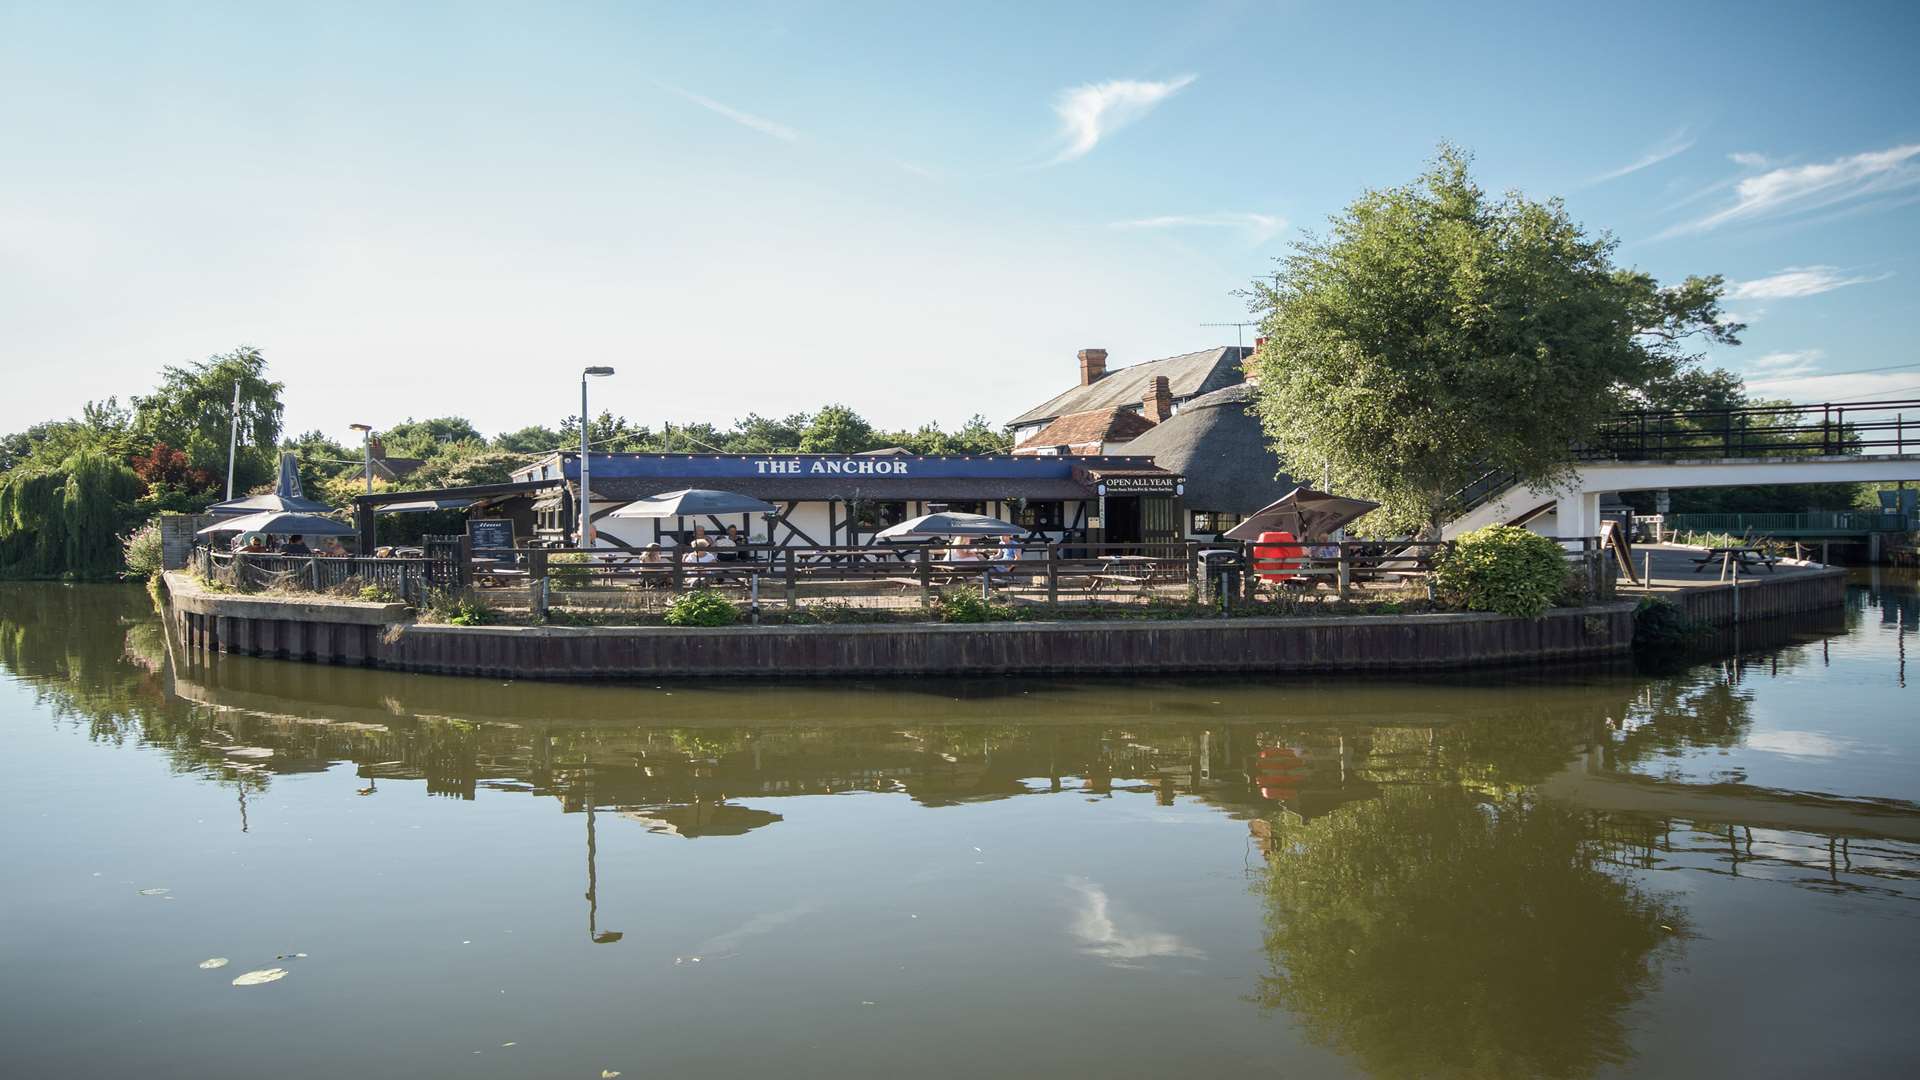 The Anchor, soon to be The Boathouse, in Yalding